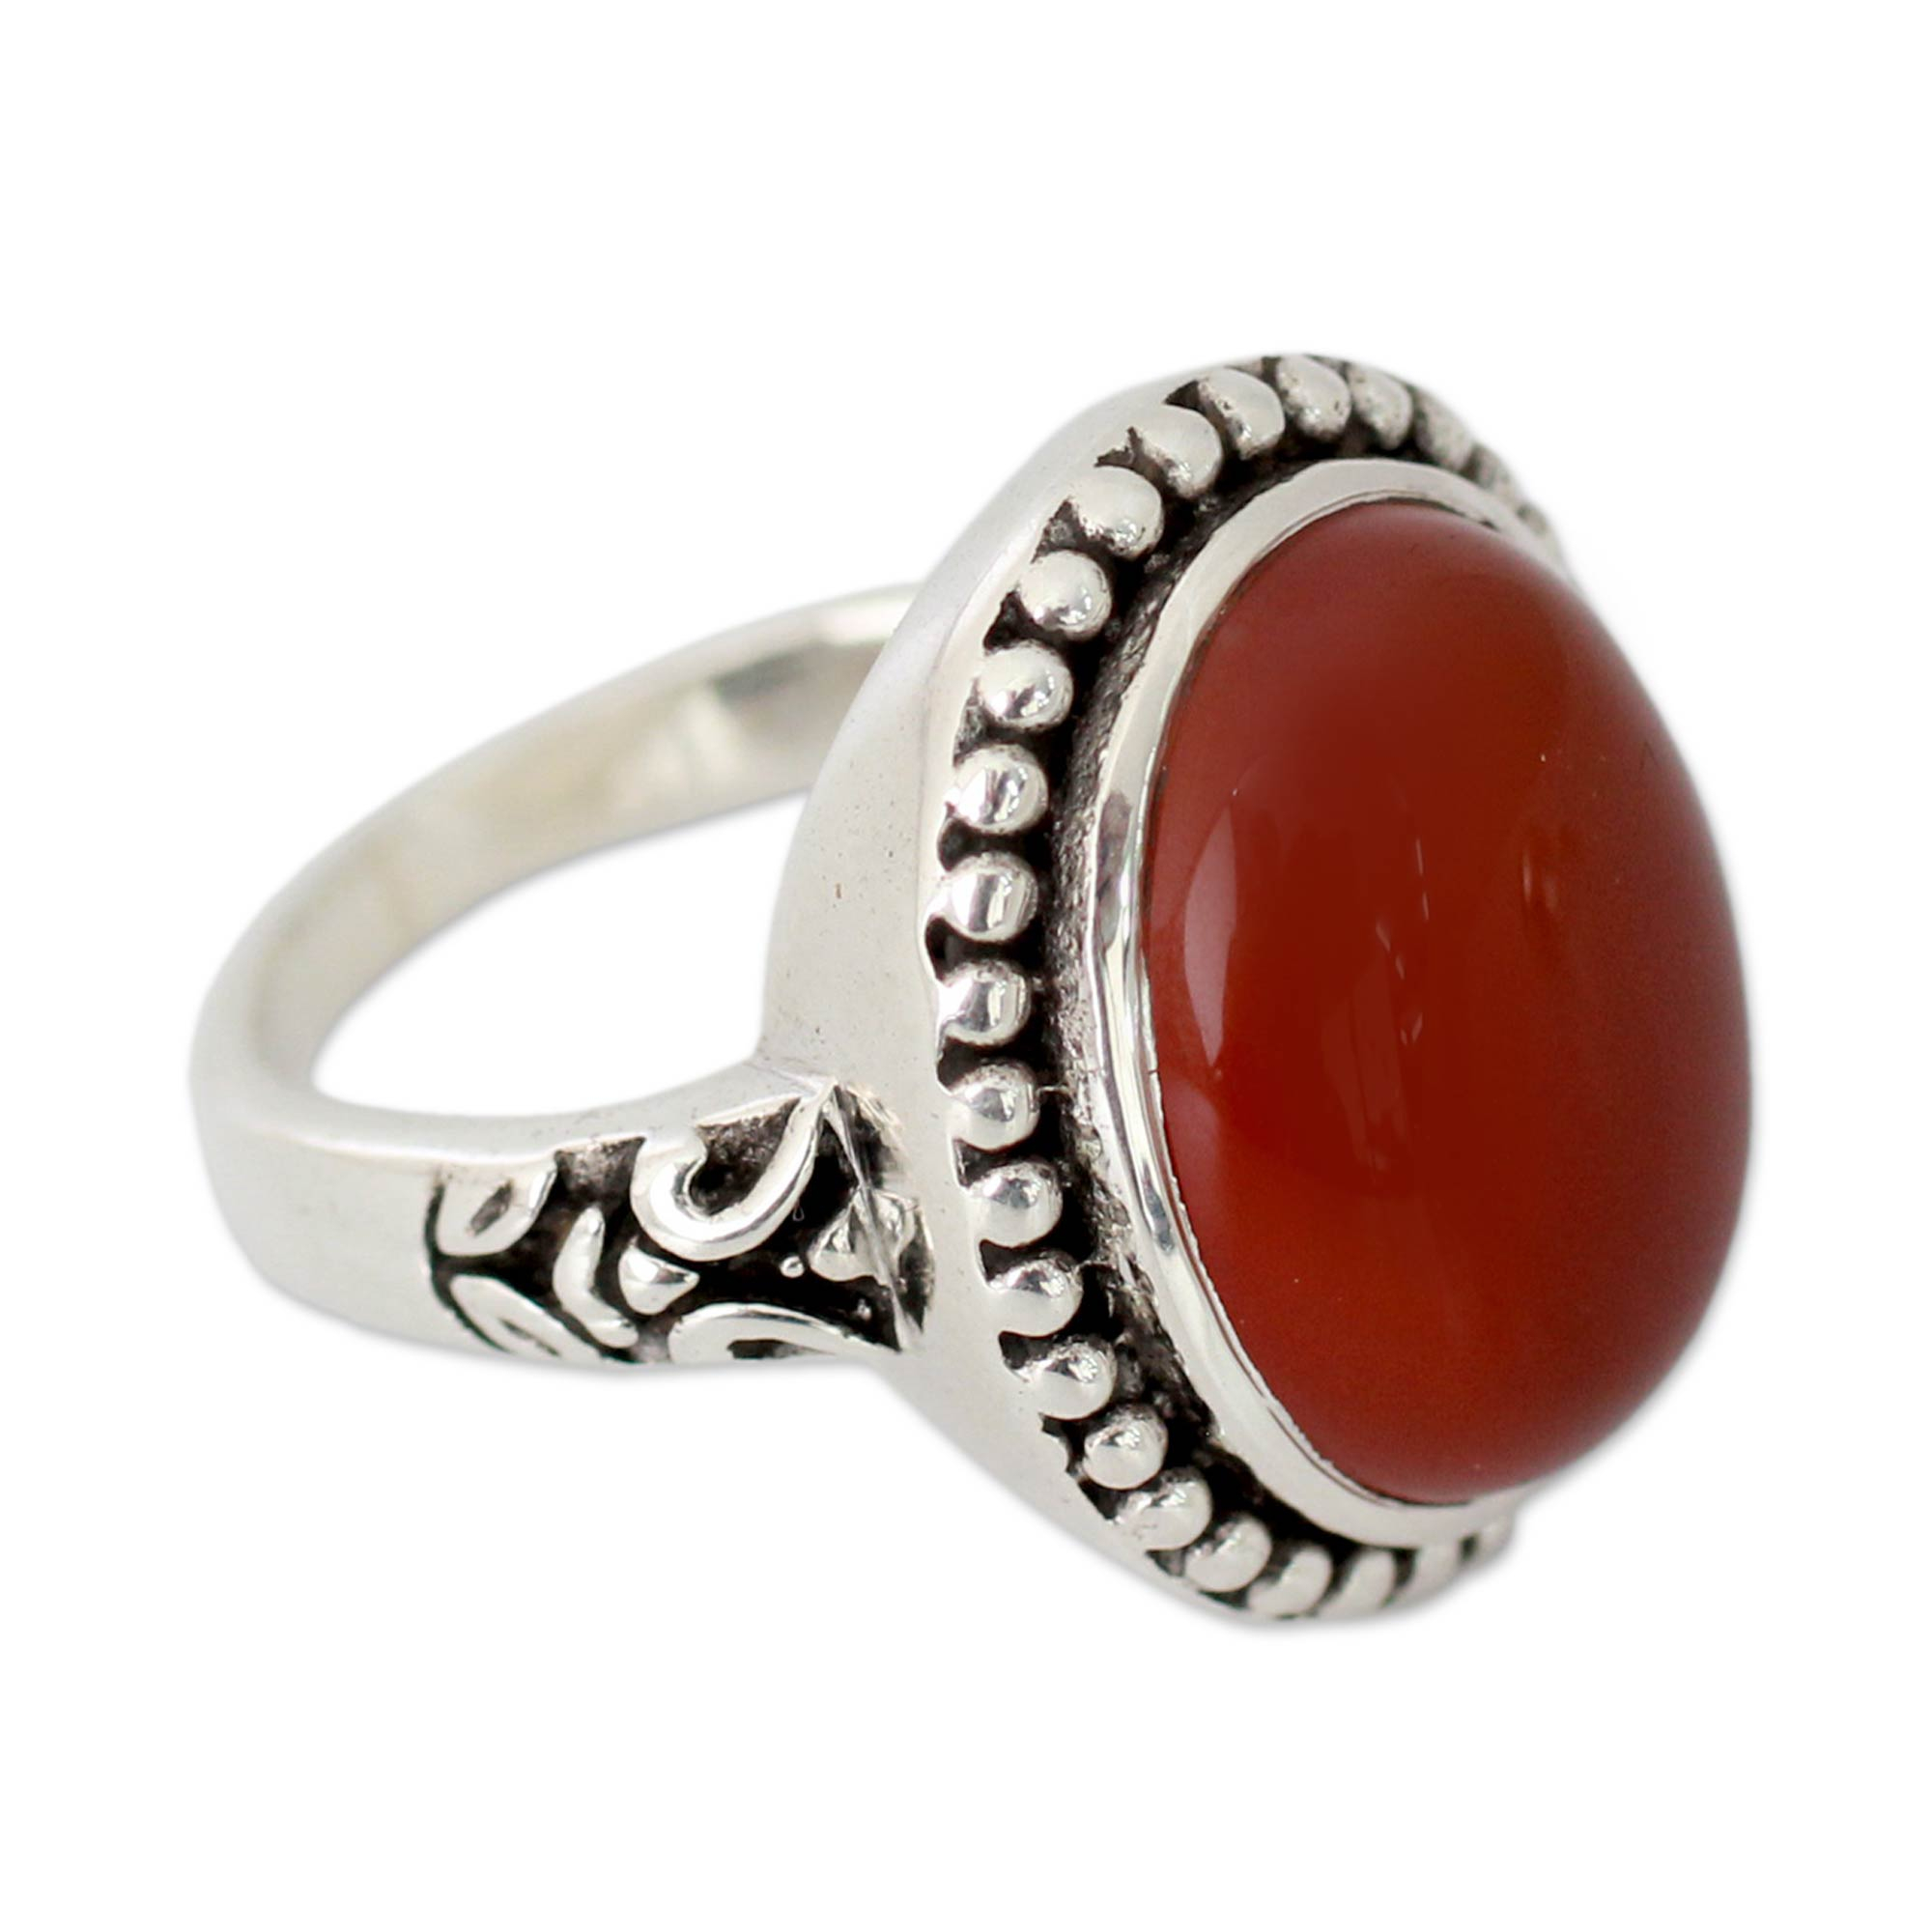 Enhanced Red Onyx and Sterling Silver Cocktail Ring - Glowing Sunset ...